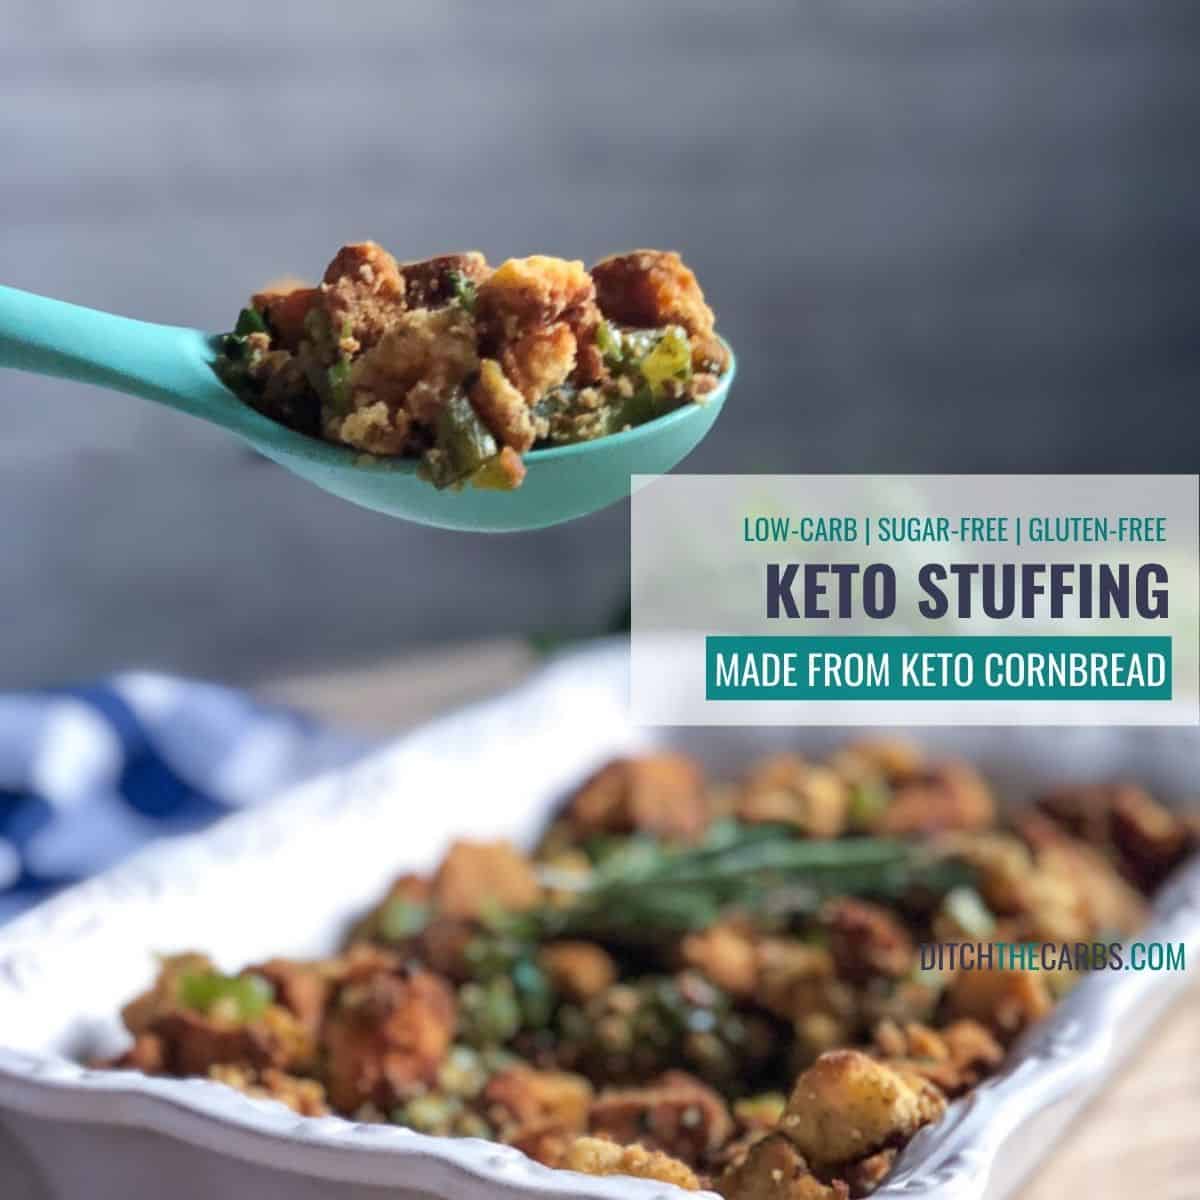 low-carb and keto stuffing held in a serving spoon about to stuff a bacon-wrapped turkey